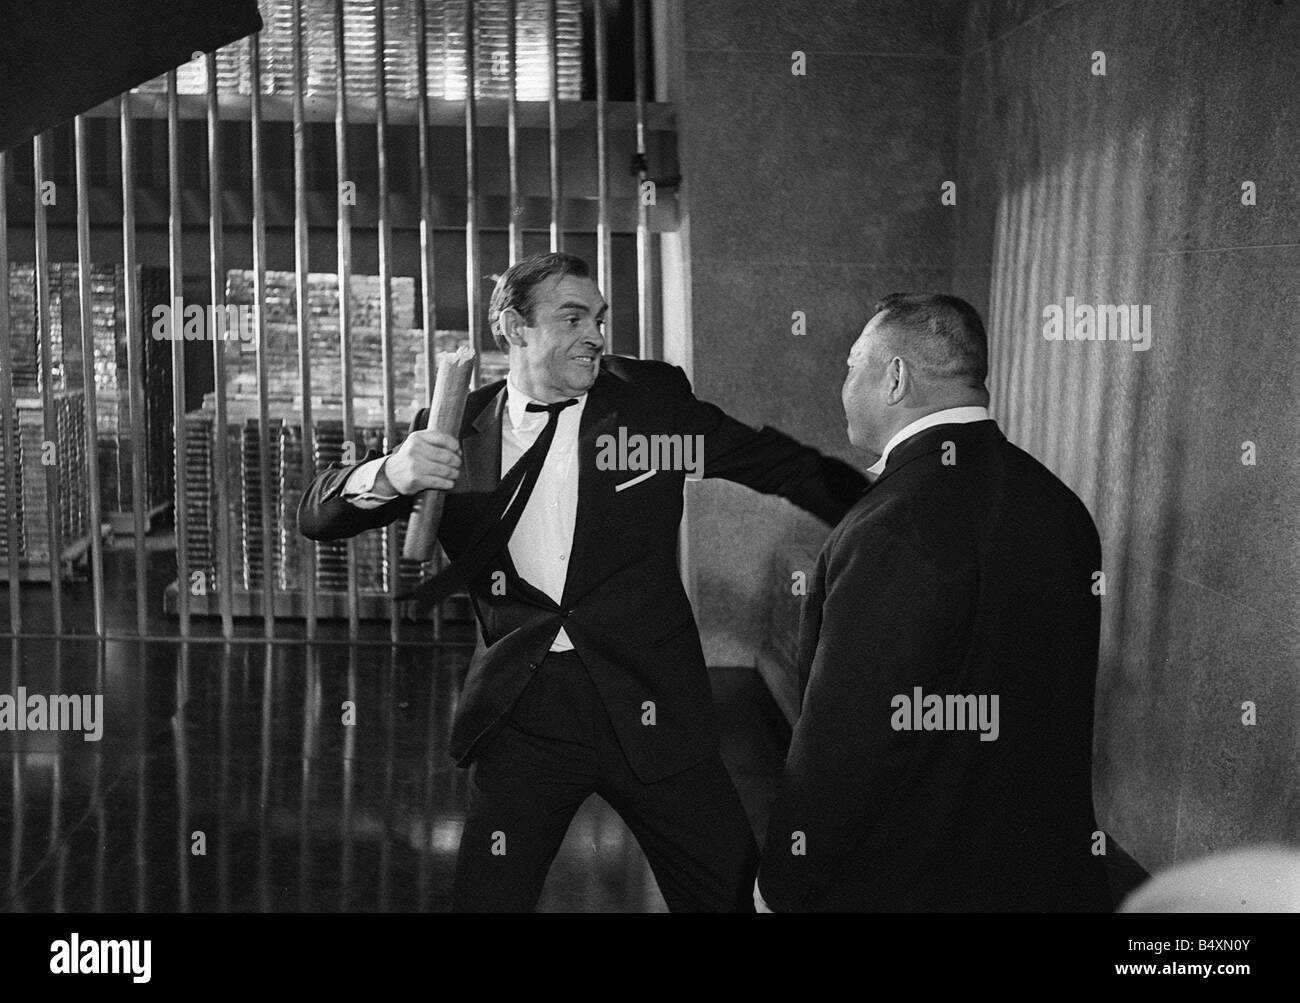 Film Goldfinger 1964 Sean Connery as James Bond 007 fighting with Goldfinger s henchman Odd Job in the vault at Fort Knox Stock Photo